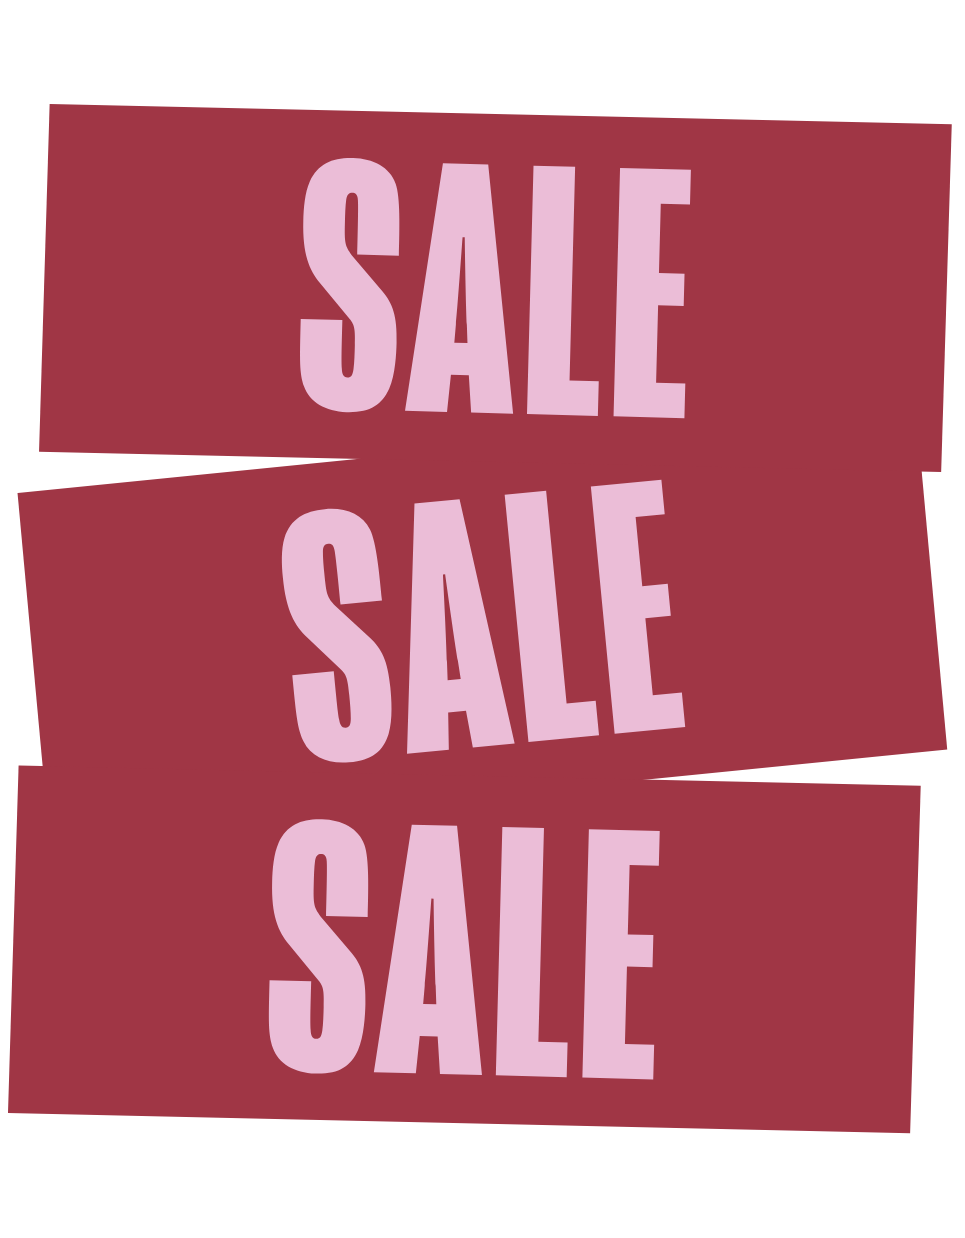 Sale: Up to 40% off